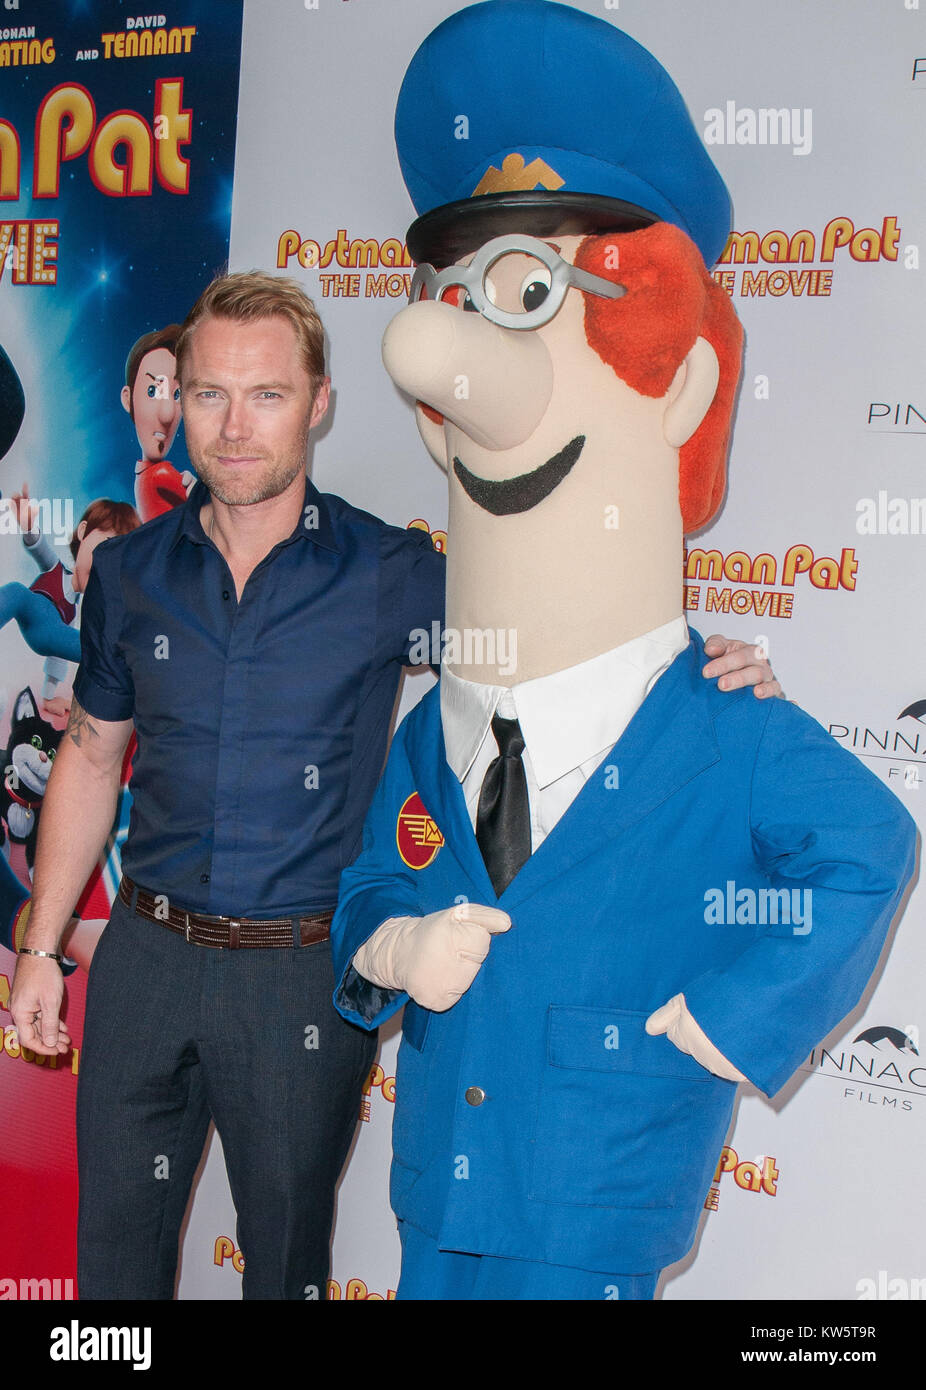 SYDNEY, AUSTRALIA - AUGUST 09: Ronan Keating arrives at the preview screening of 'Postman Pat - The Movie' at Hoyts Entertainment Quarter on August 9, 2014 in Sydney, Australia  People:  Ronan Keating Stock Photo